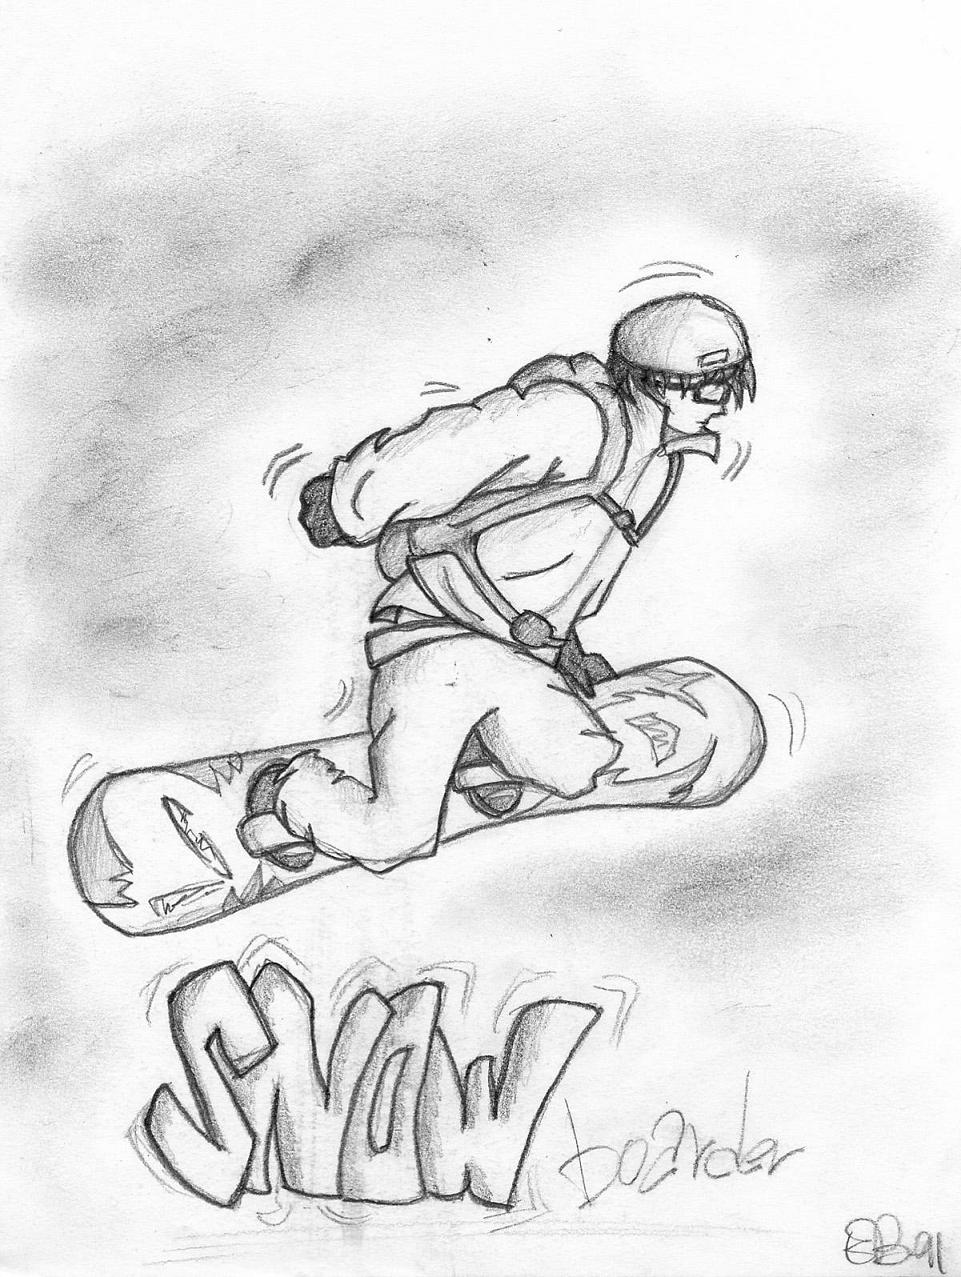 "Snowboarder" by EB91